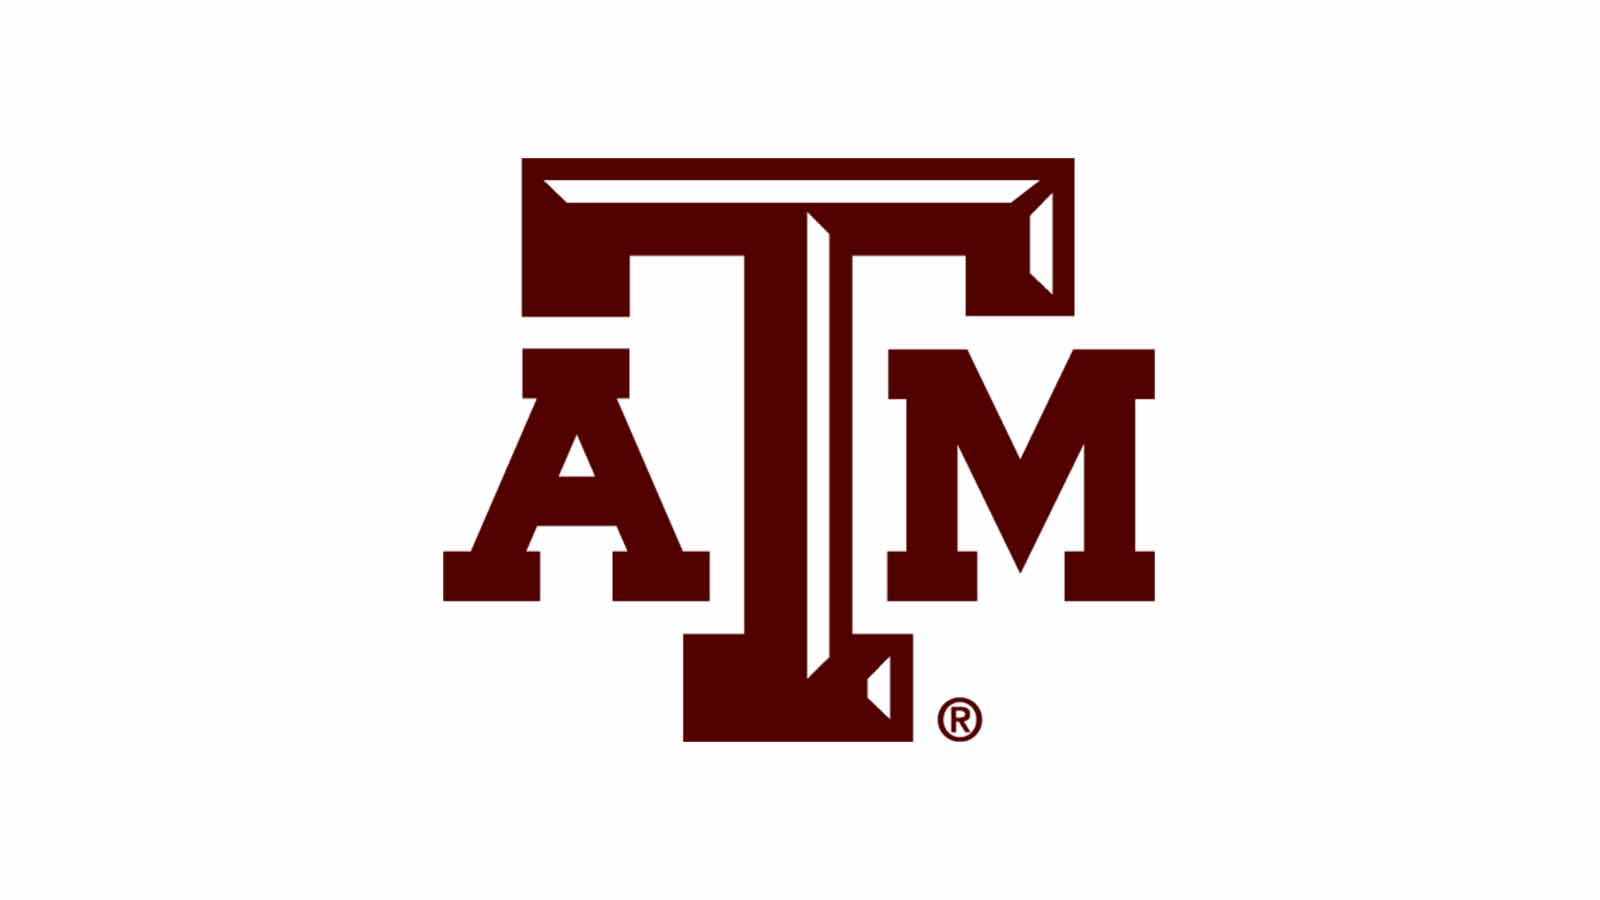 texas a and m logo